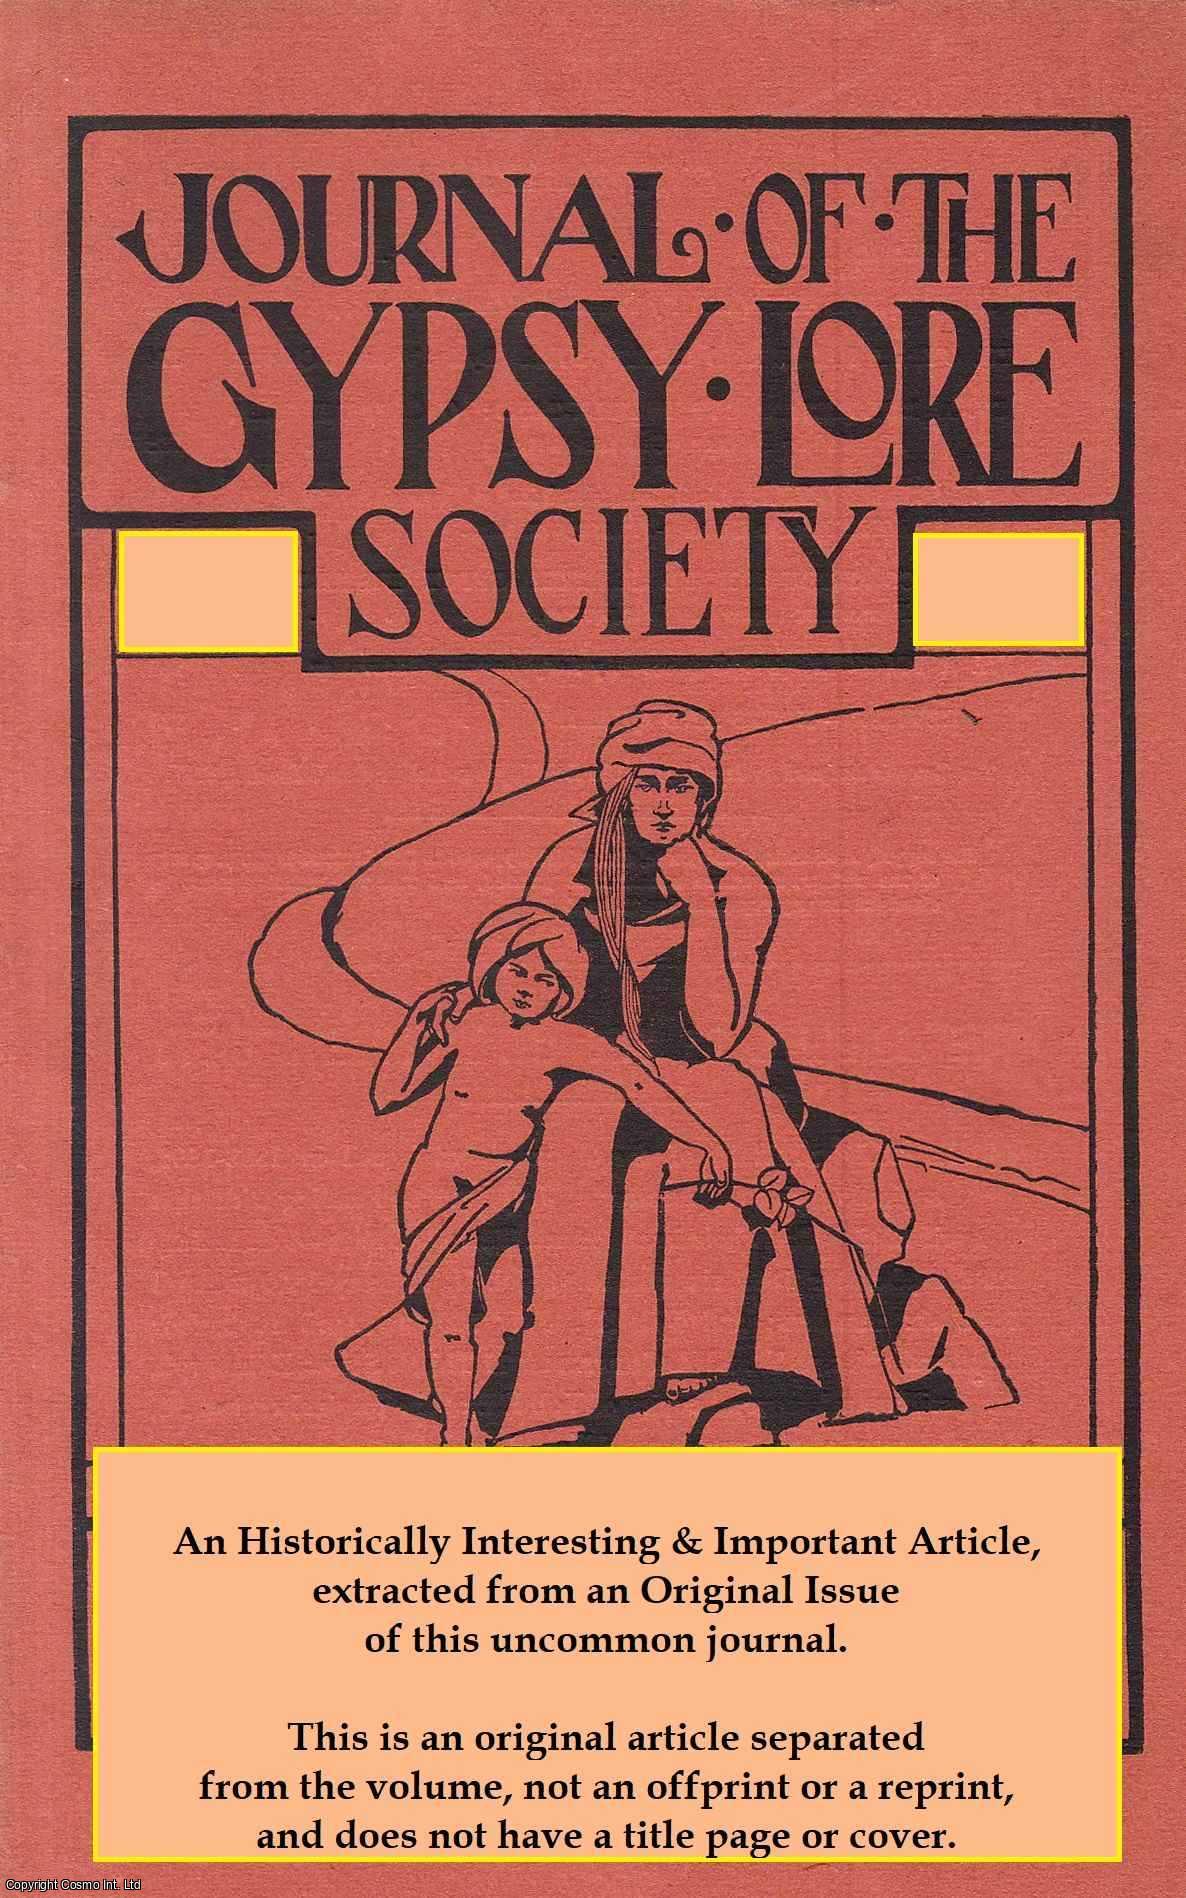 Walter Starkie and Dr Endre Spur - Hungarian Gypsy Fiddlers and Orchestras of Hungary. An uncommon original article from the Journal of the Gypsy Lore Society, 1937.